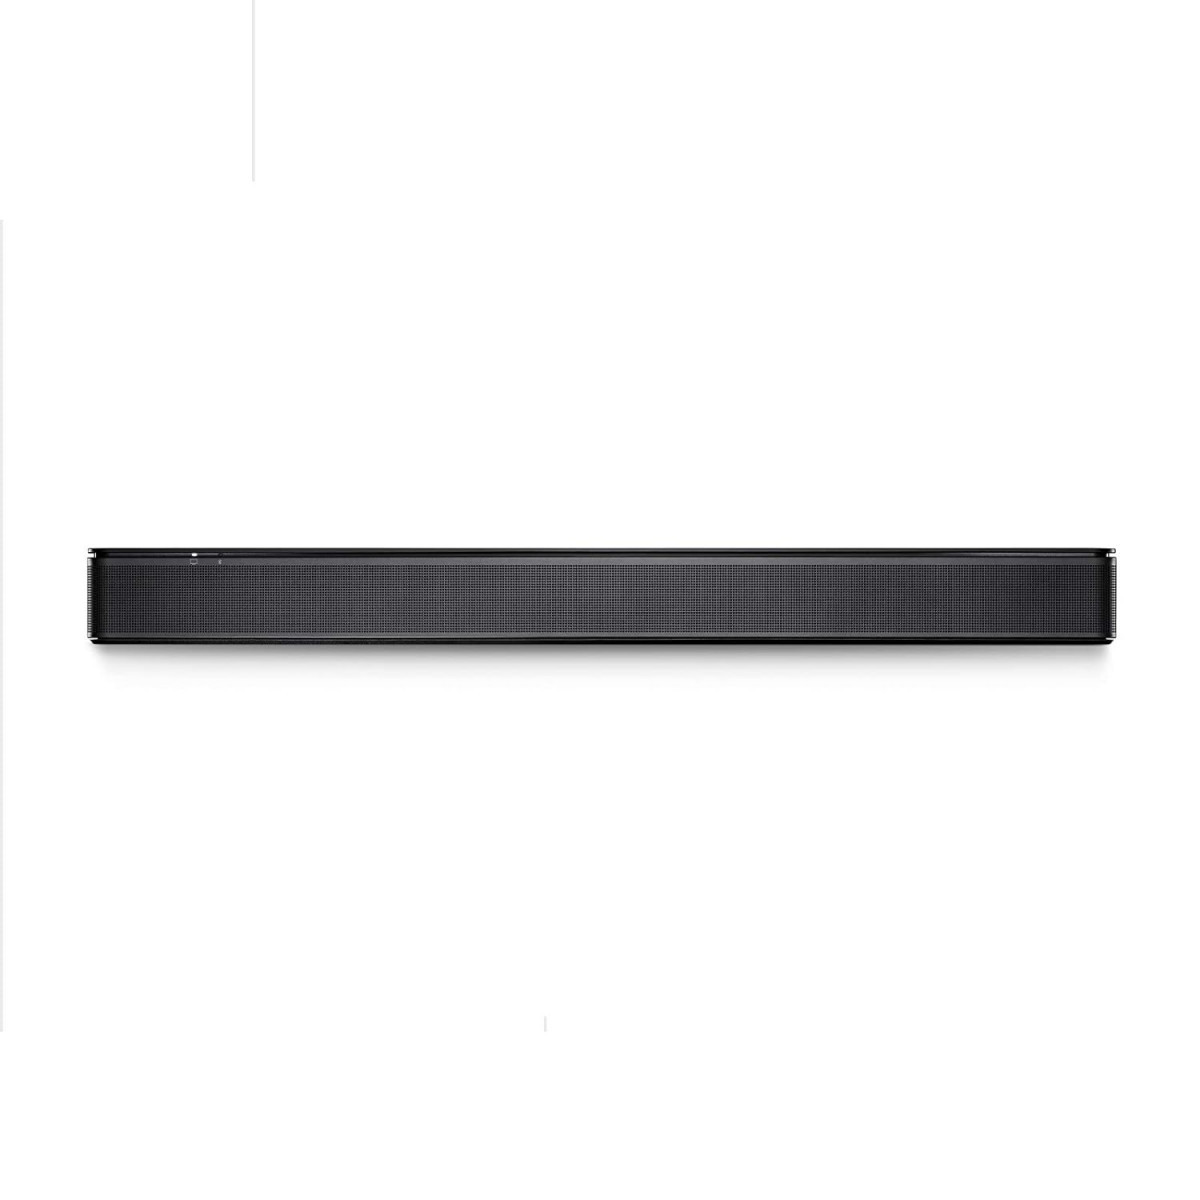 Bose TV Speaker- Small Soundbar for TV with Bluetooth and HDMI-ARC Connectivity Includes Remote Control and Optical Audio Cable Wall mountable Black